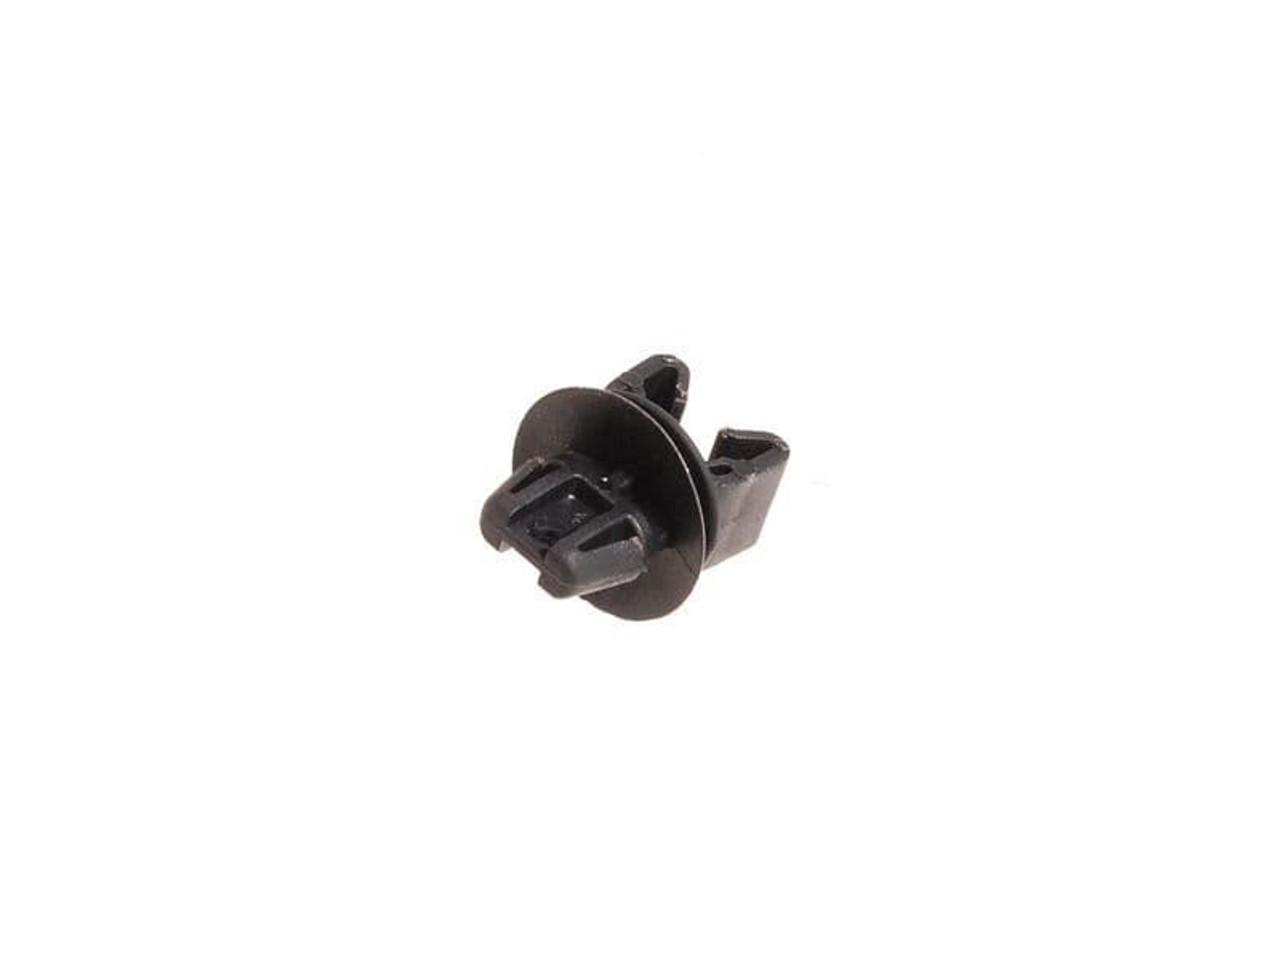 Genuine Discovery 3, Discovery 4 and Range Rover Sport Handbrake Cable Clip - SPV500020